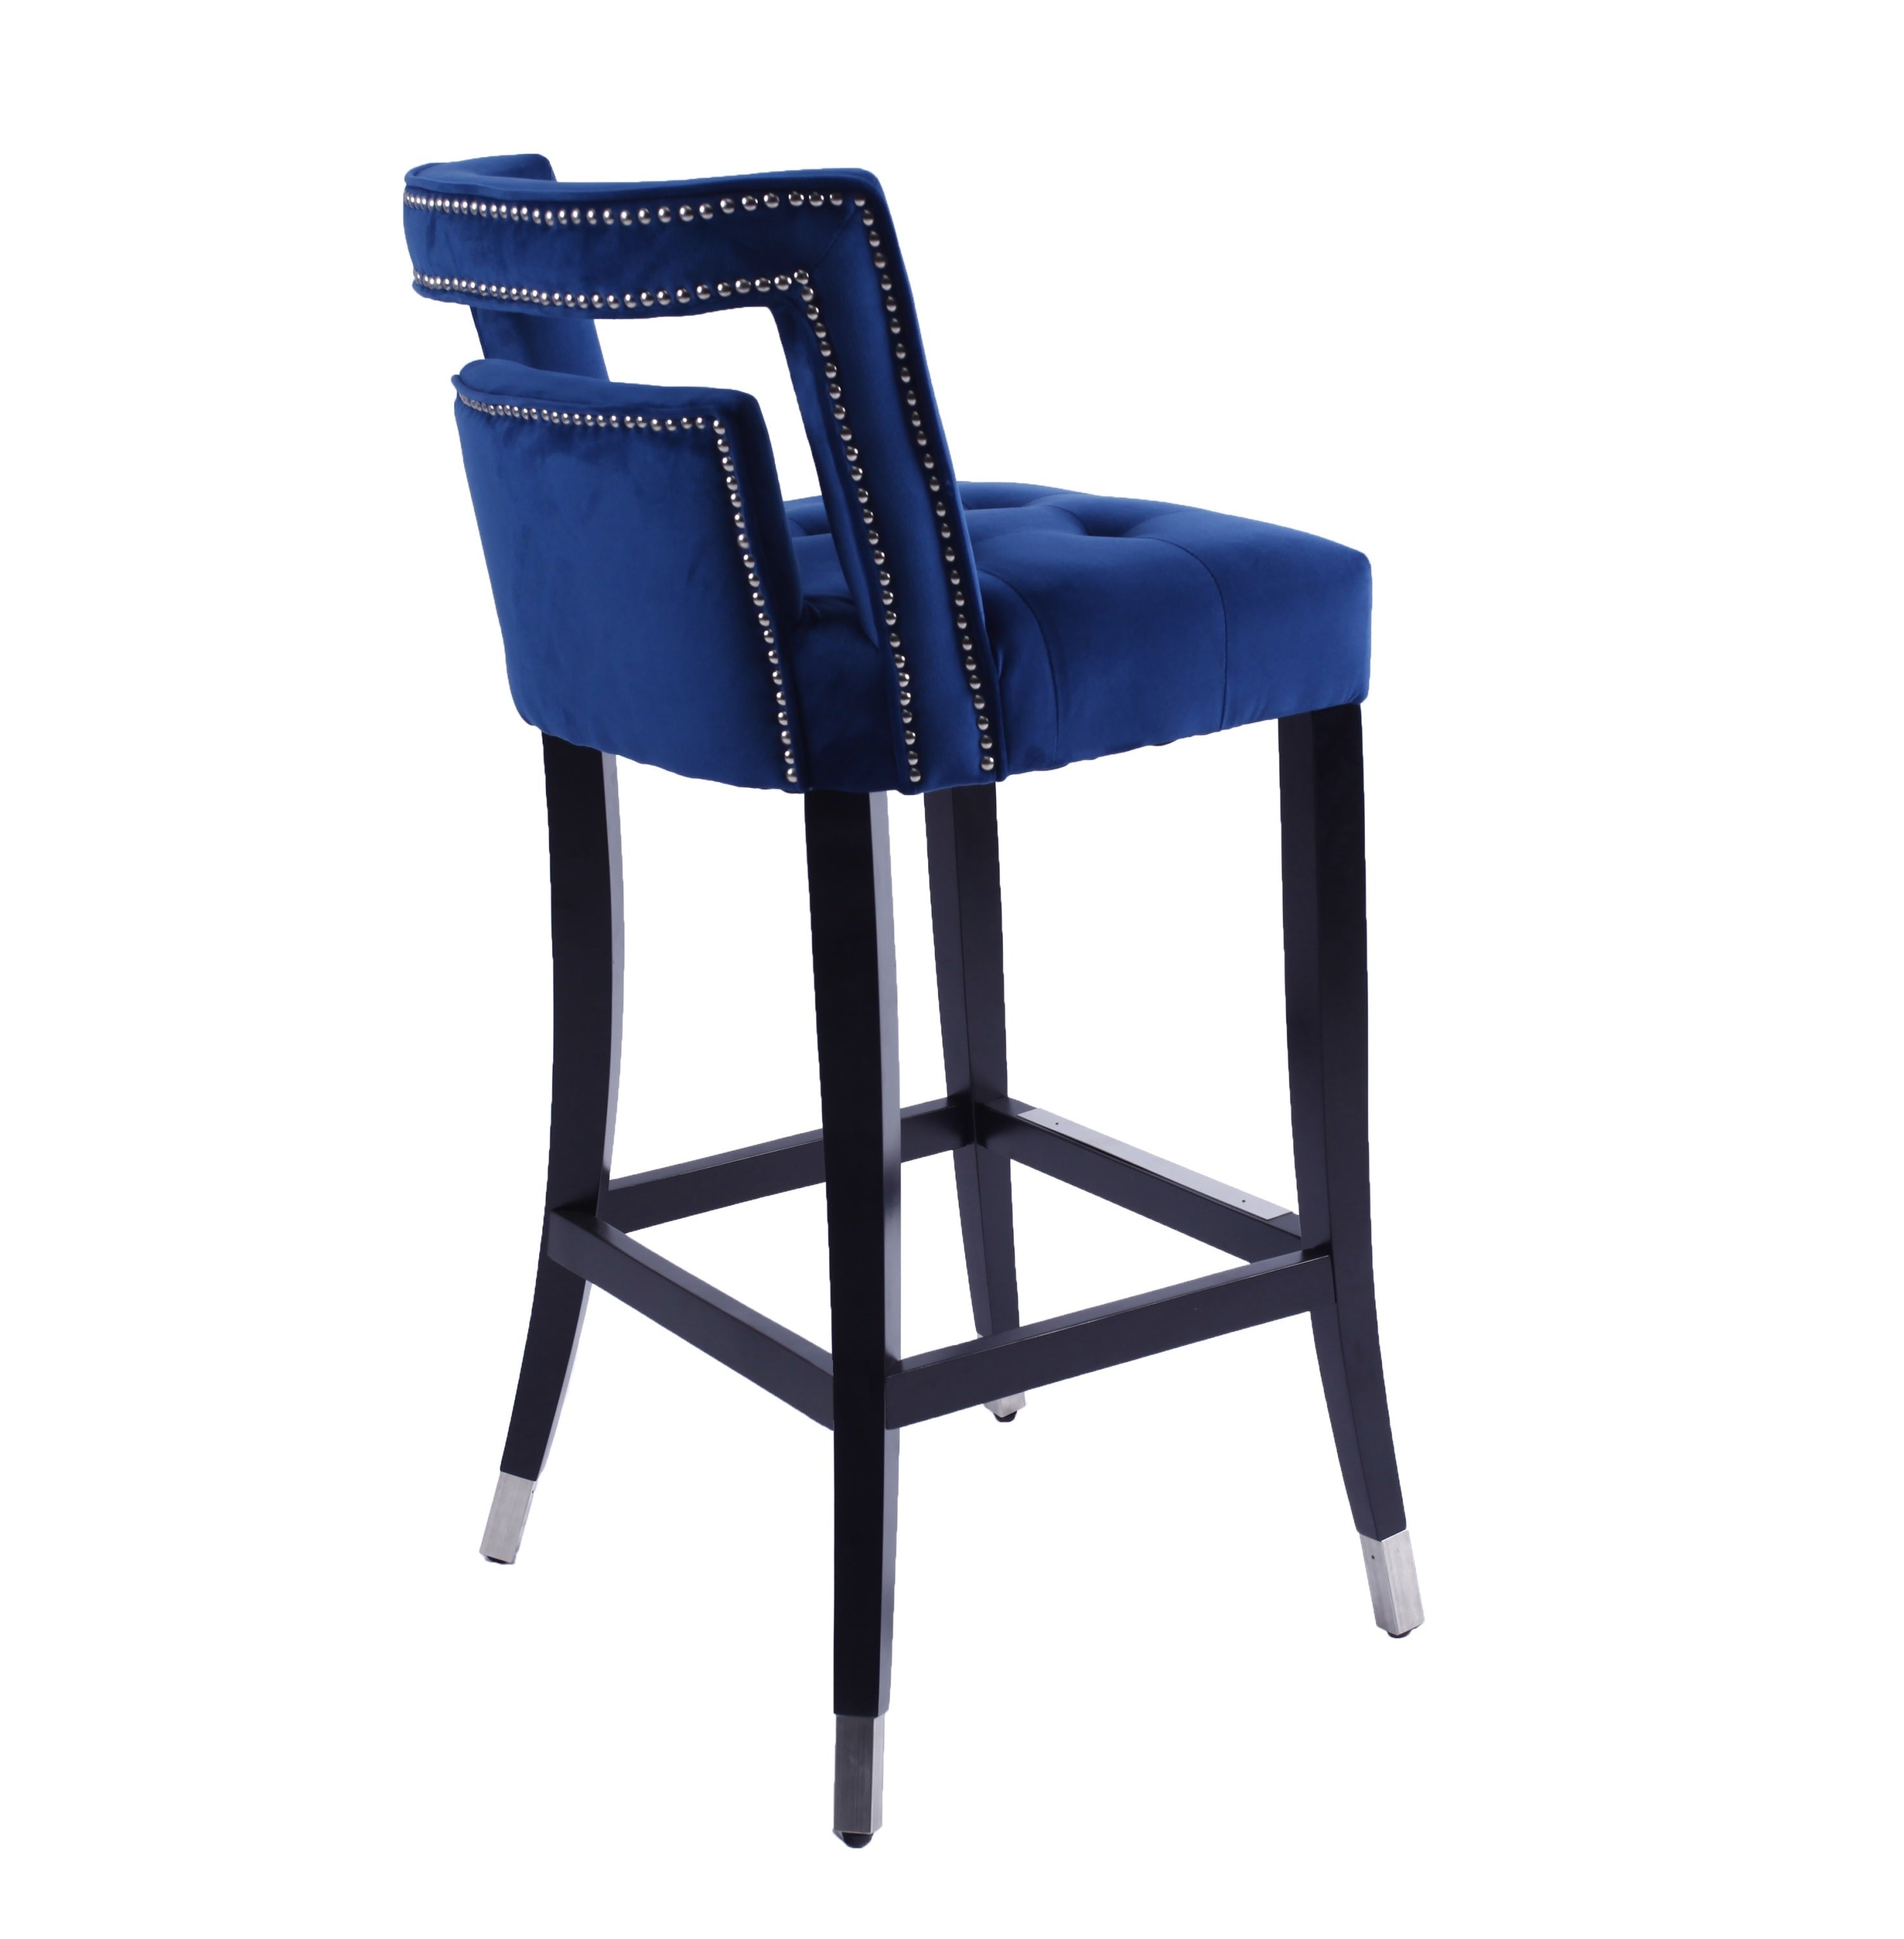 Suede Velvet Barstool with nailheads Living Room Chair 2 pcs Set - 30 inch Seater height - Navy